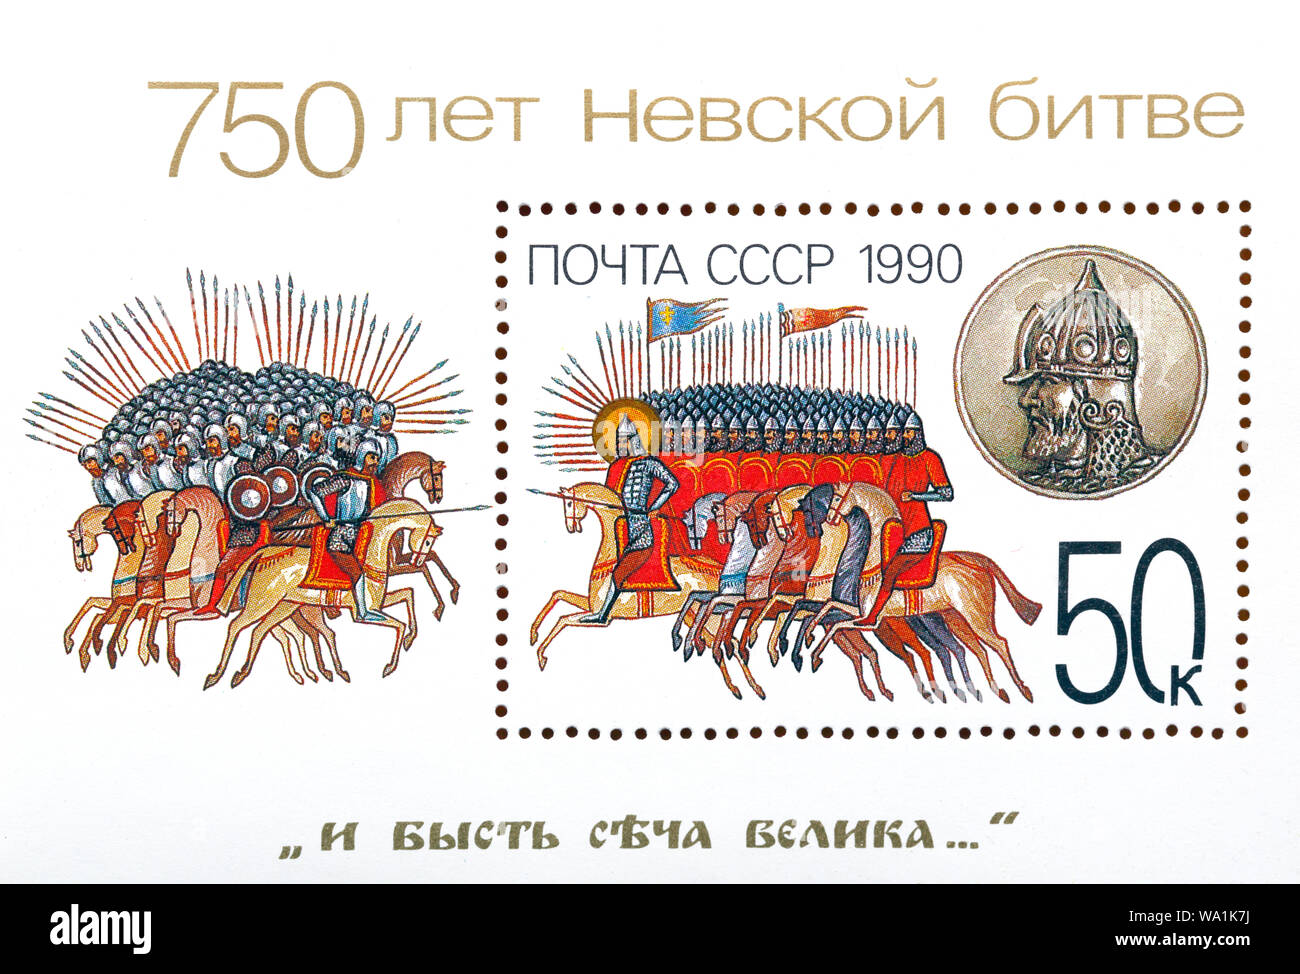 Russian medieval army, 750 years of Neva battle, postage stamp, Russia, USSR, 1990 Stock Photo